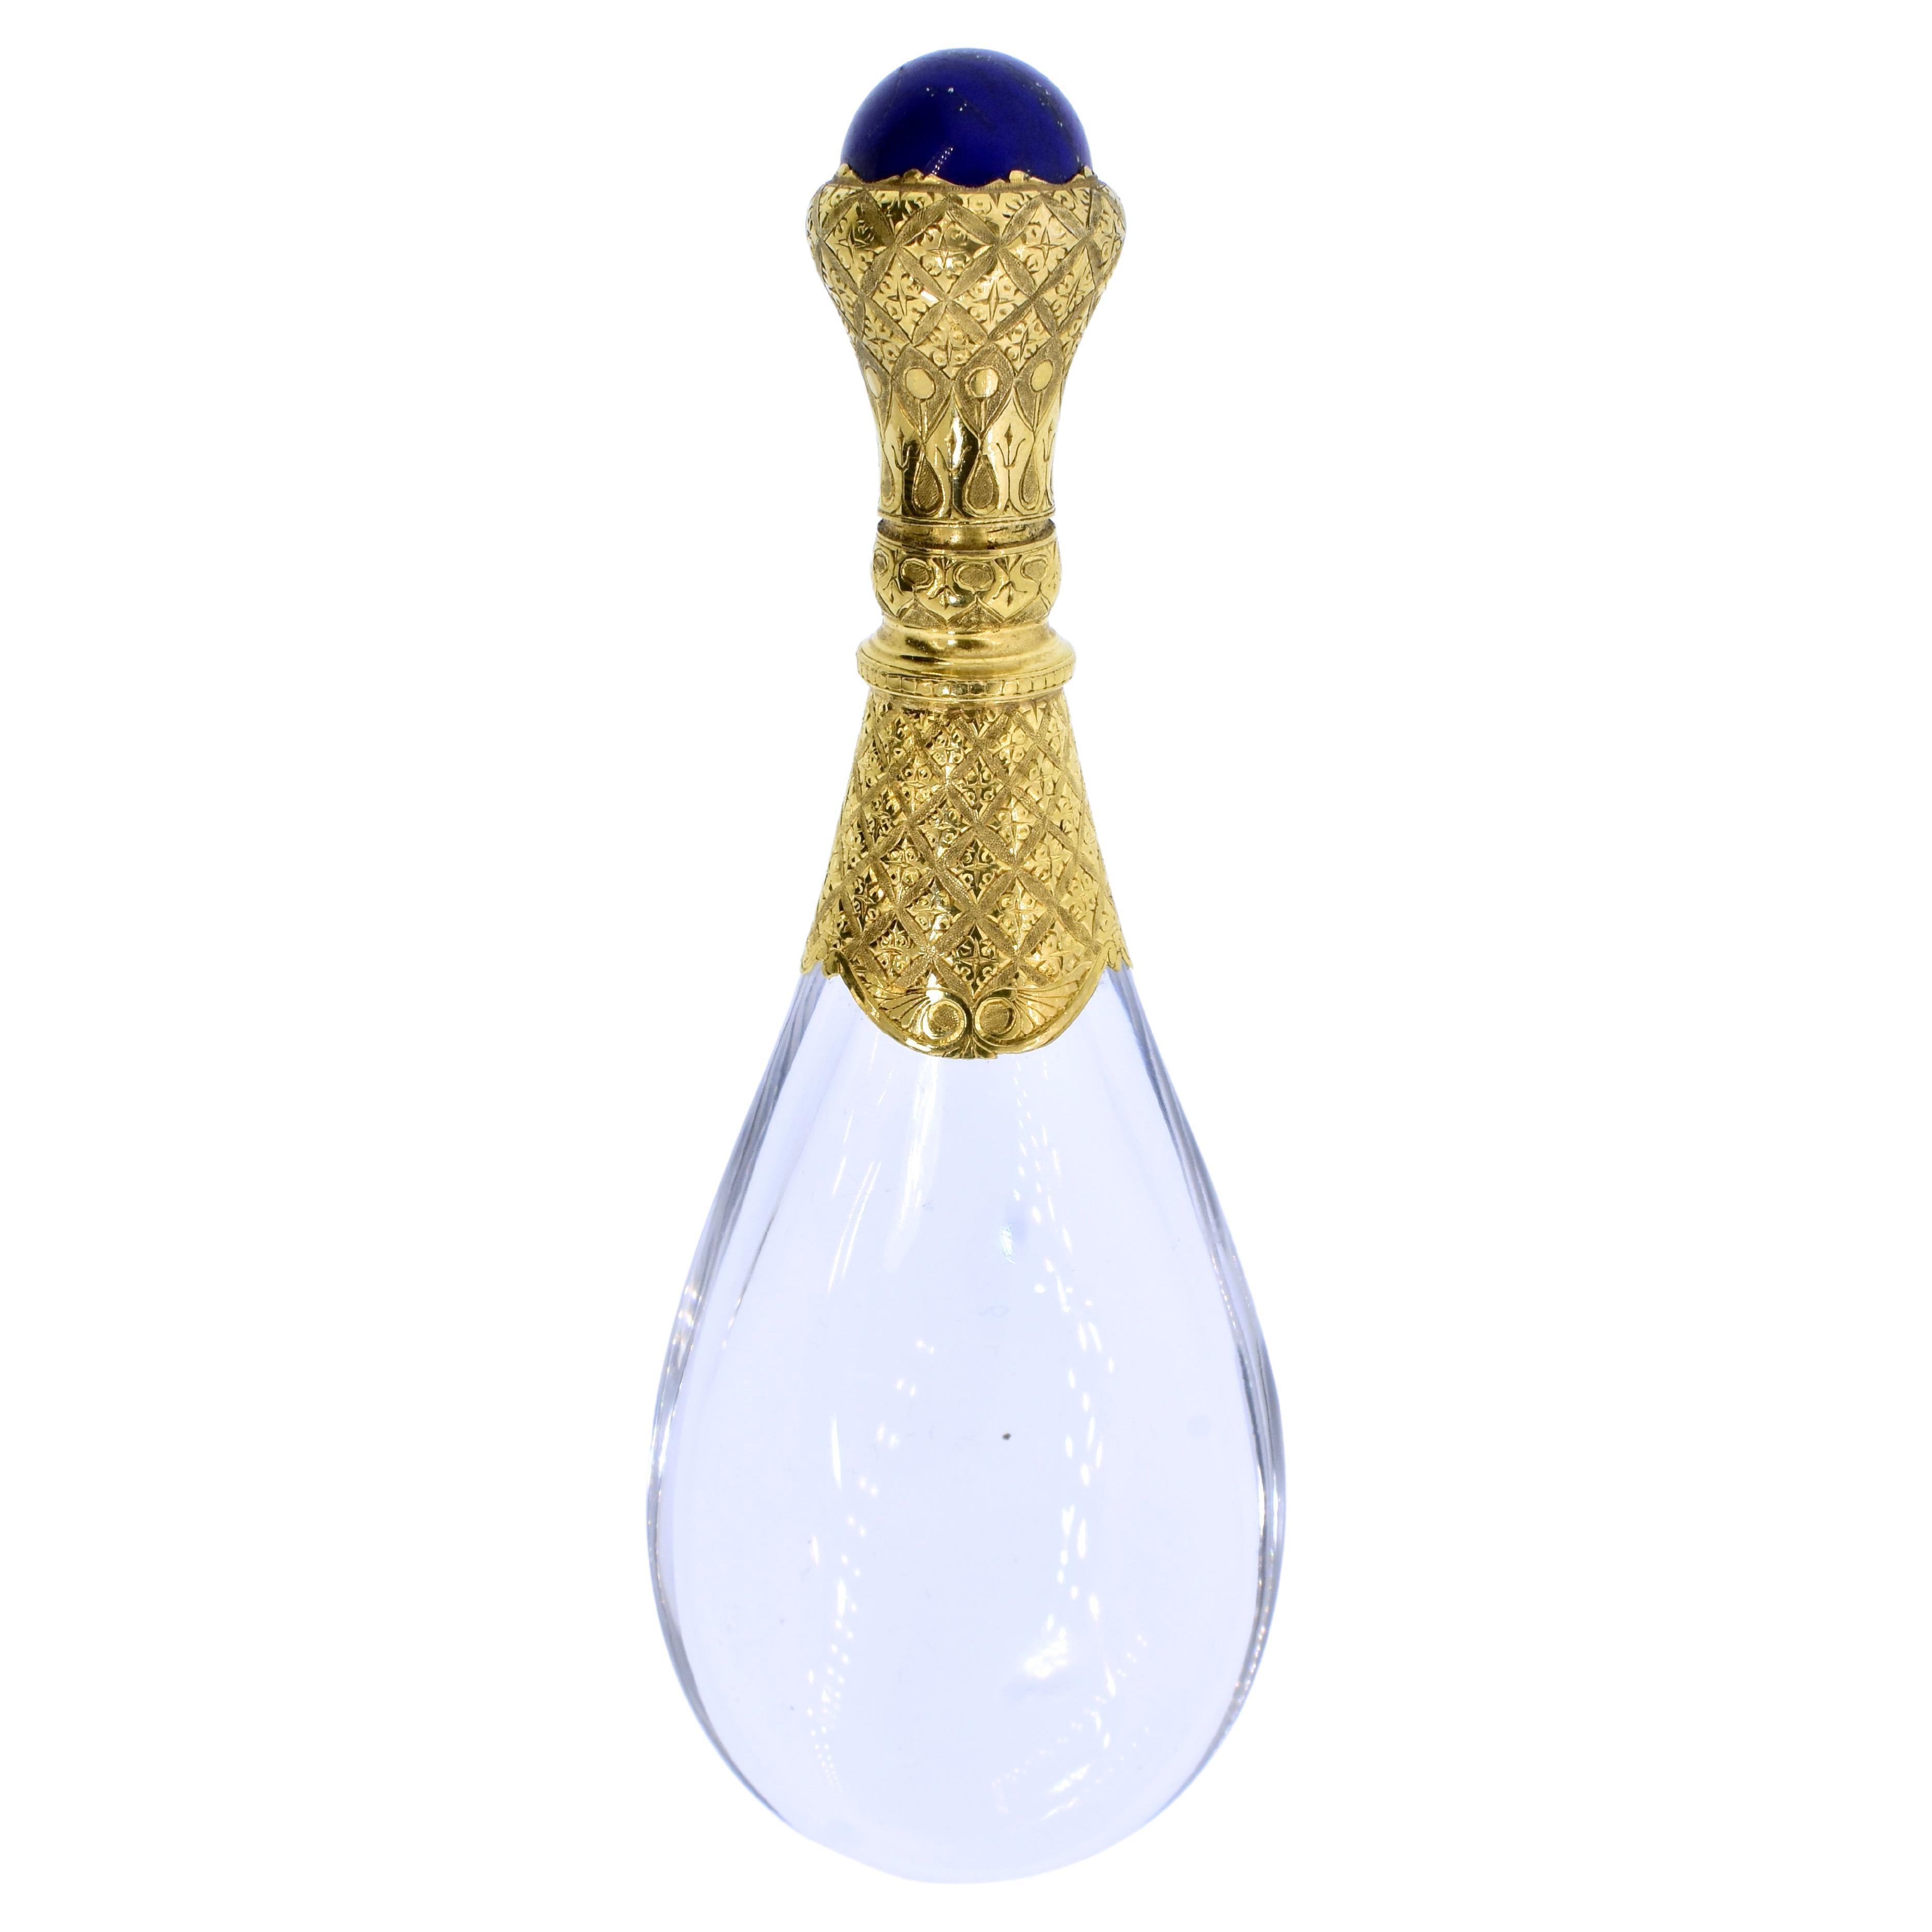 Antique French 18K, Lapis & Rock Crystal Perfume Bottle, Auguste Fraumont, 1850